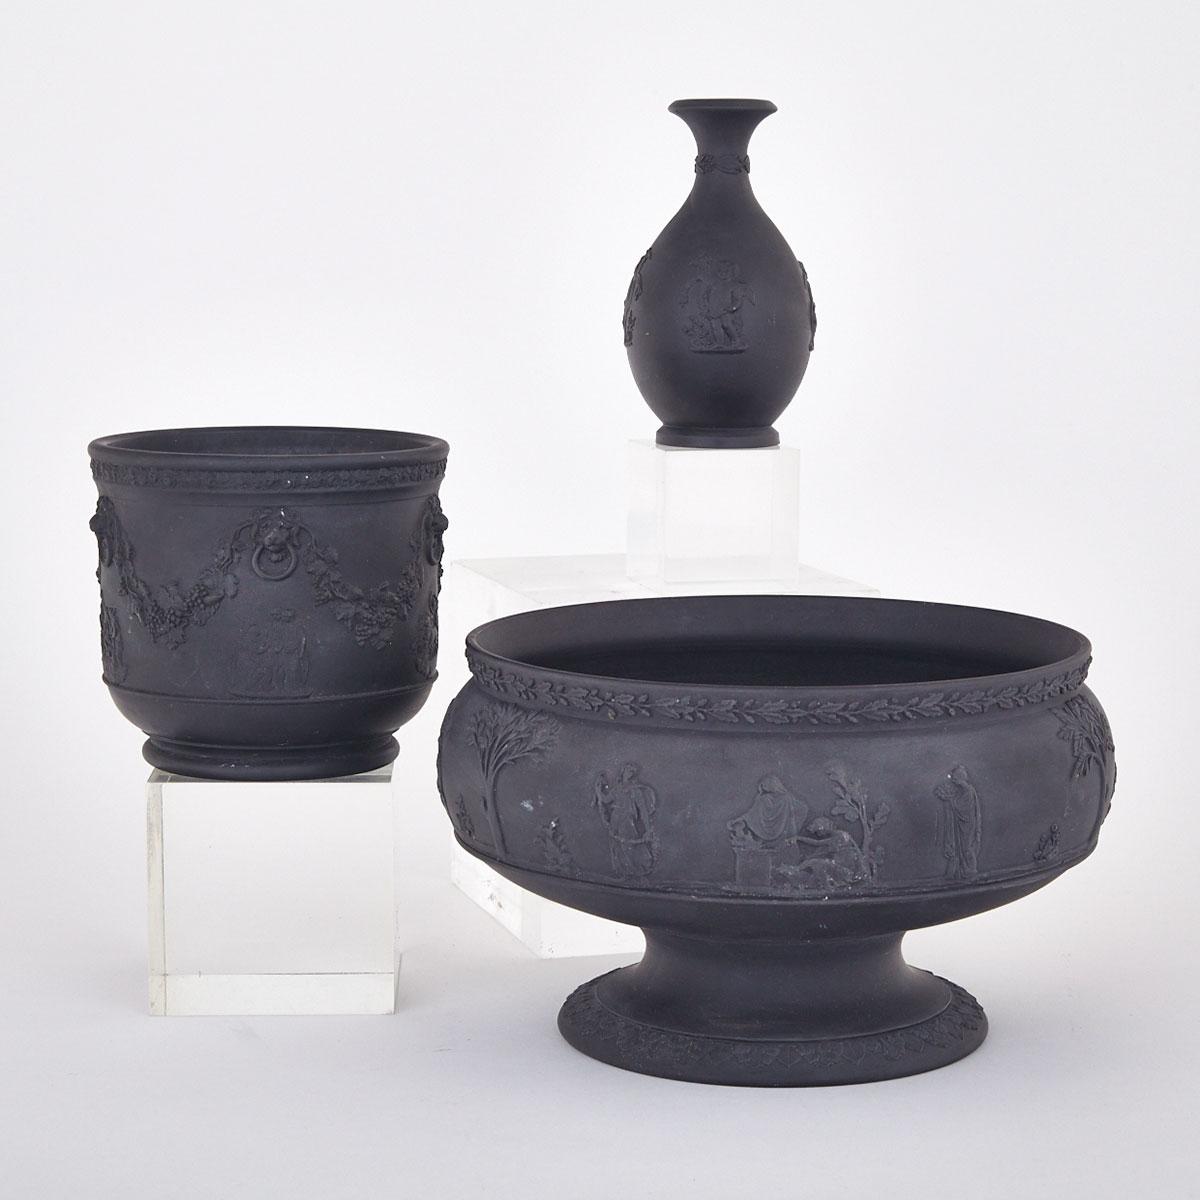 Wedgwood Black Basalt Footed Bowl, Cachepot and a Small Vase, 19th/20th century